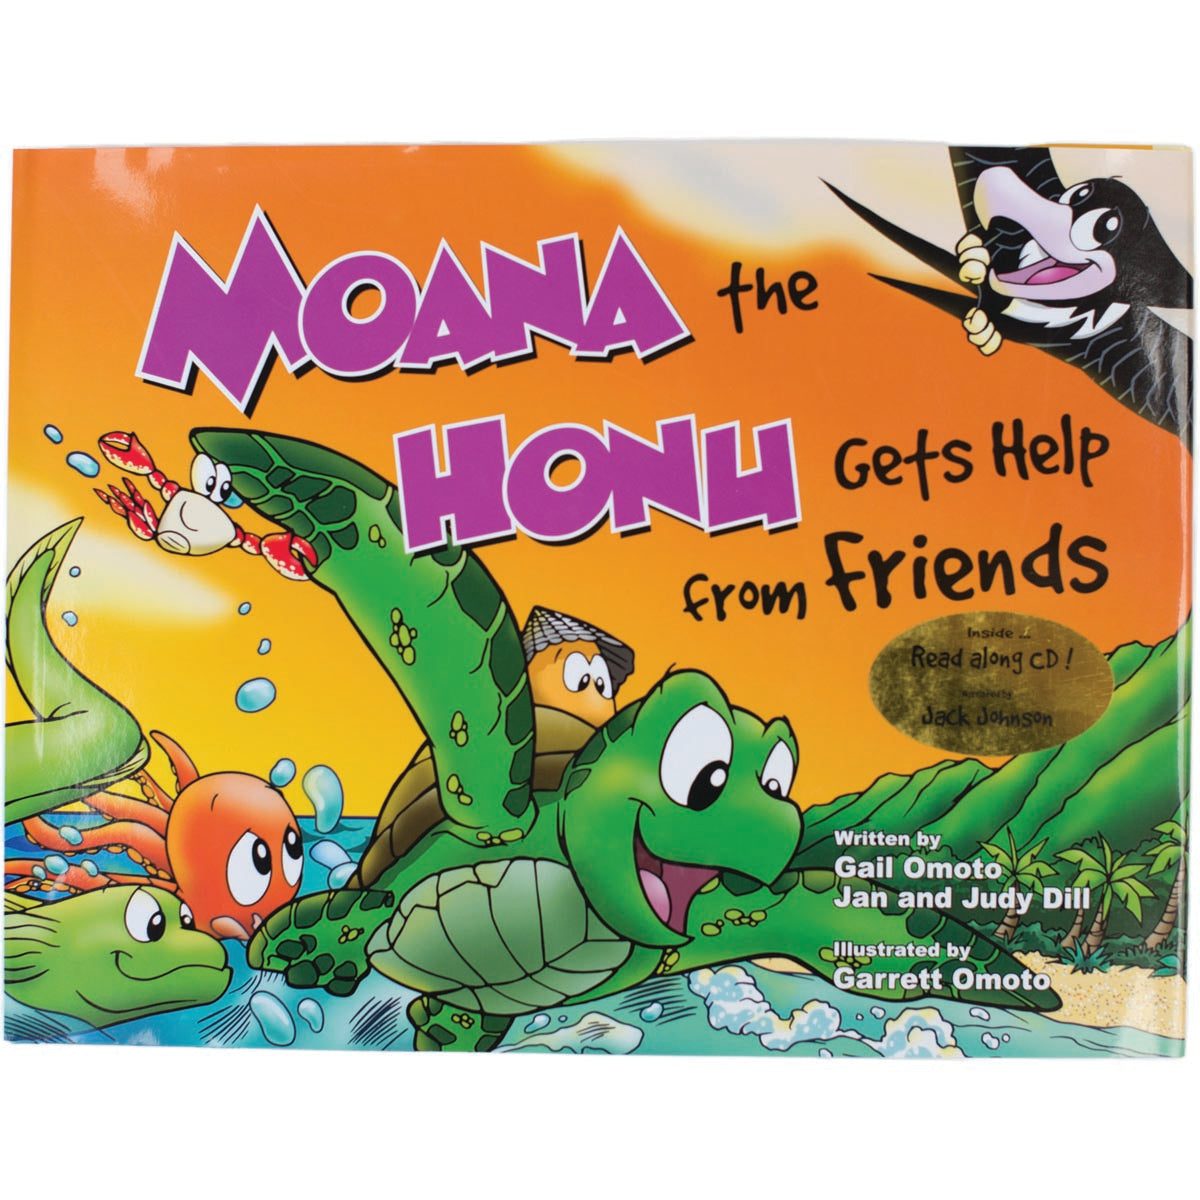 Moana the Honu Gets Help from Friends